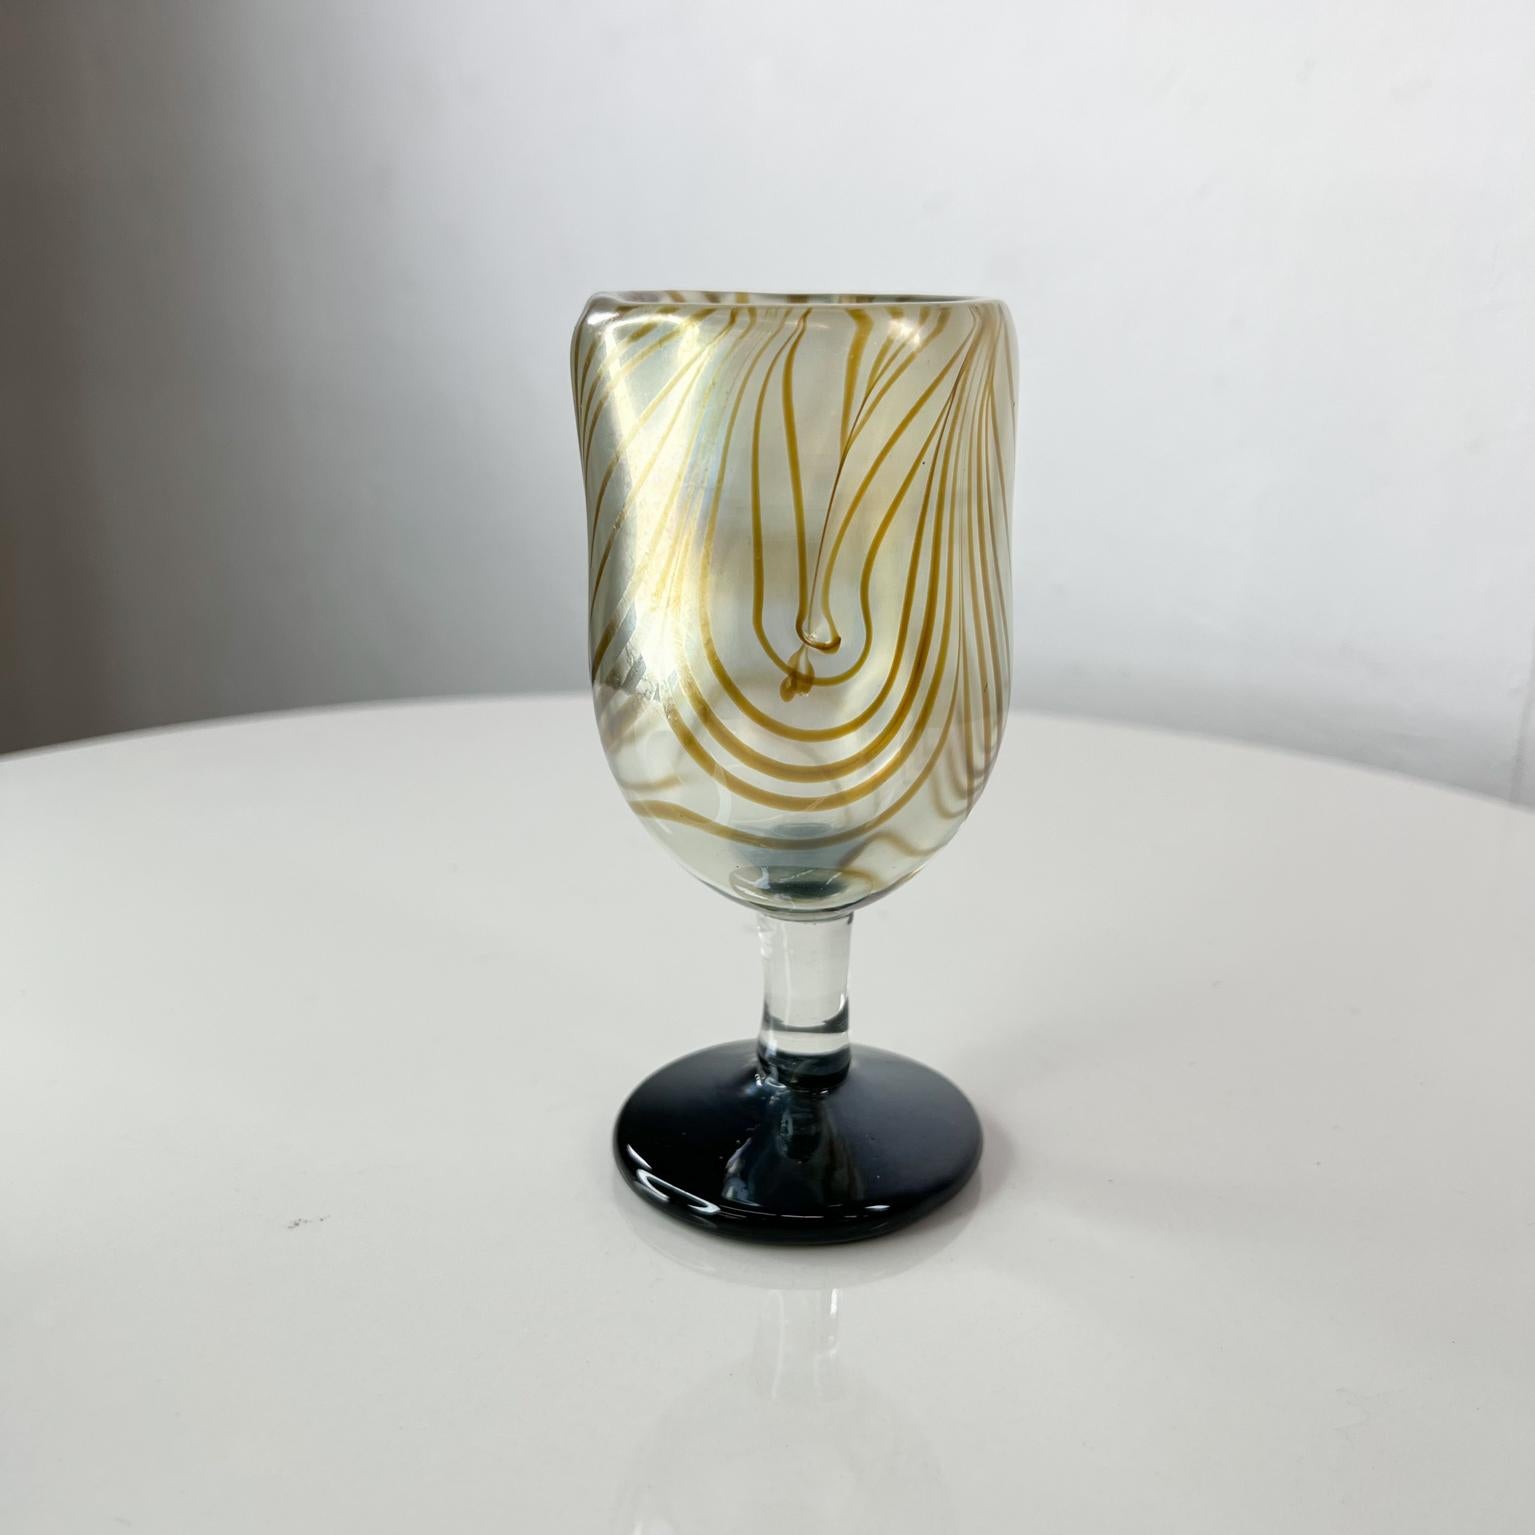 1970s Studio Art Glass Goblet handmade by California artist Norm Thomas
Signed at bottom hard to read.
Measures: 2.63 diameter x 5.63 tall.
Unrestored original vintage condition.
See images provided.

